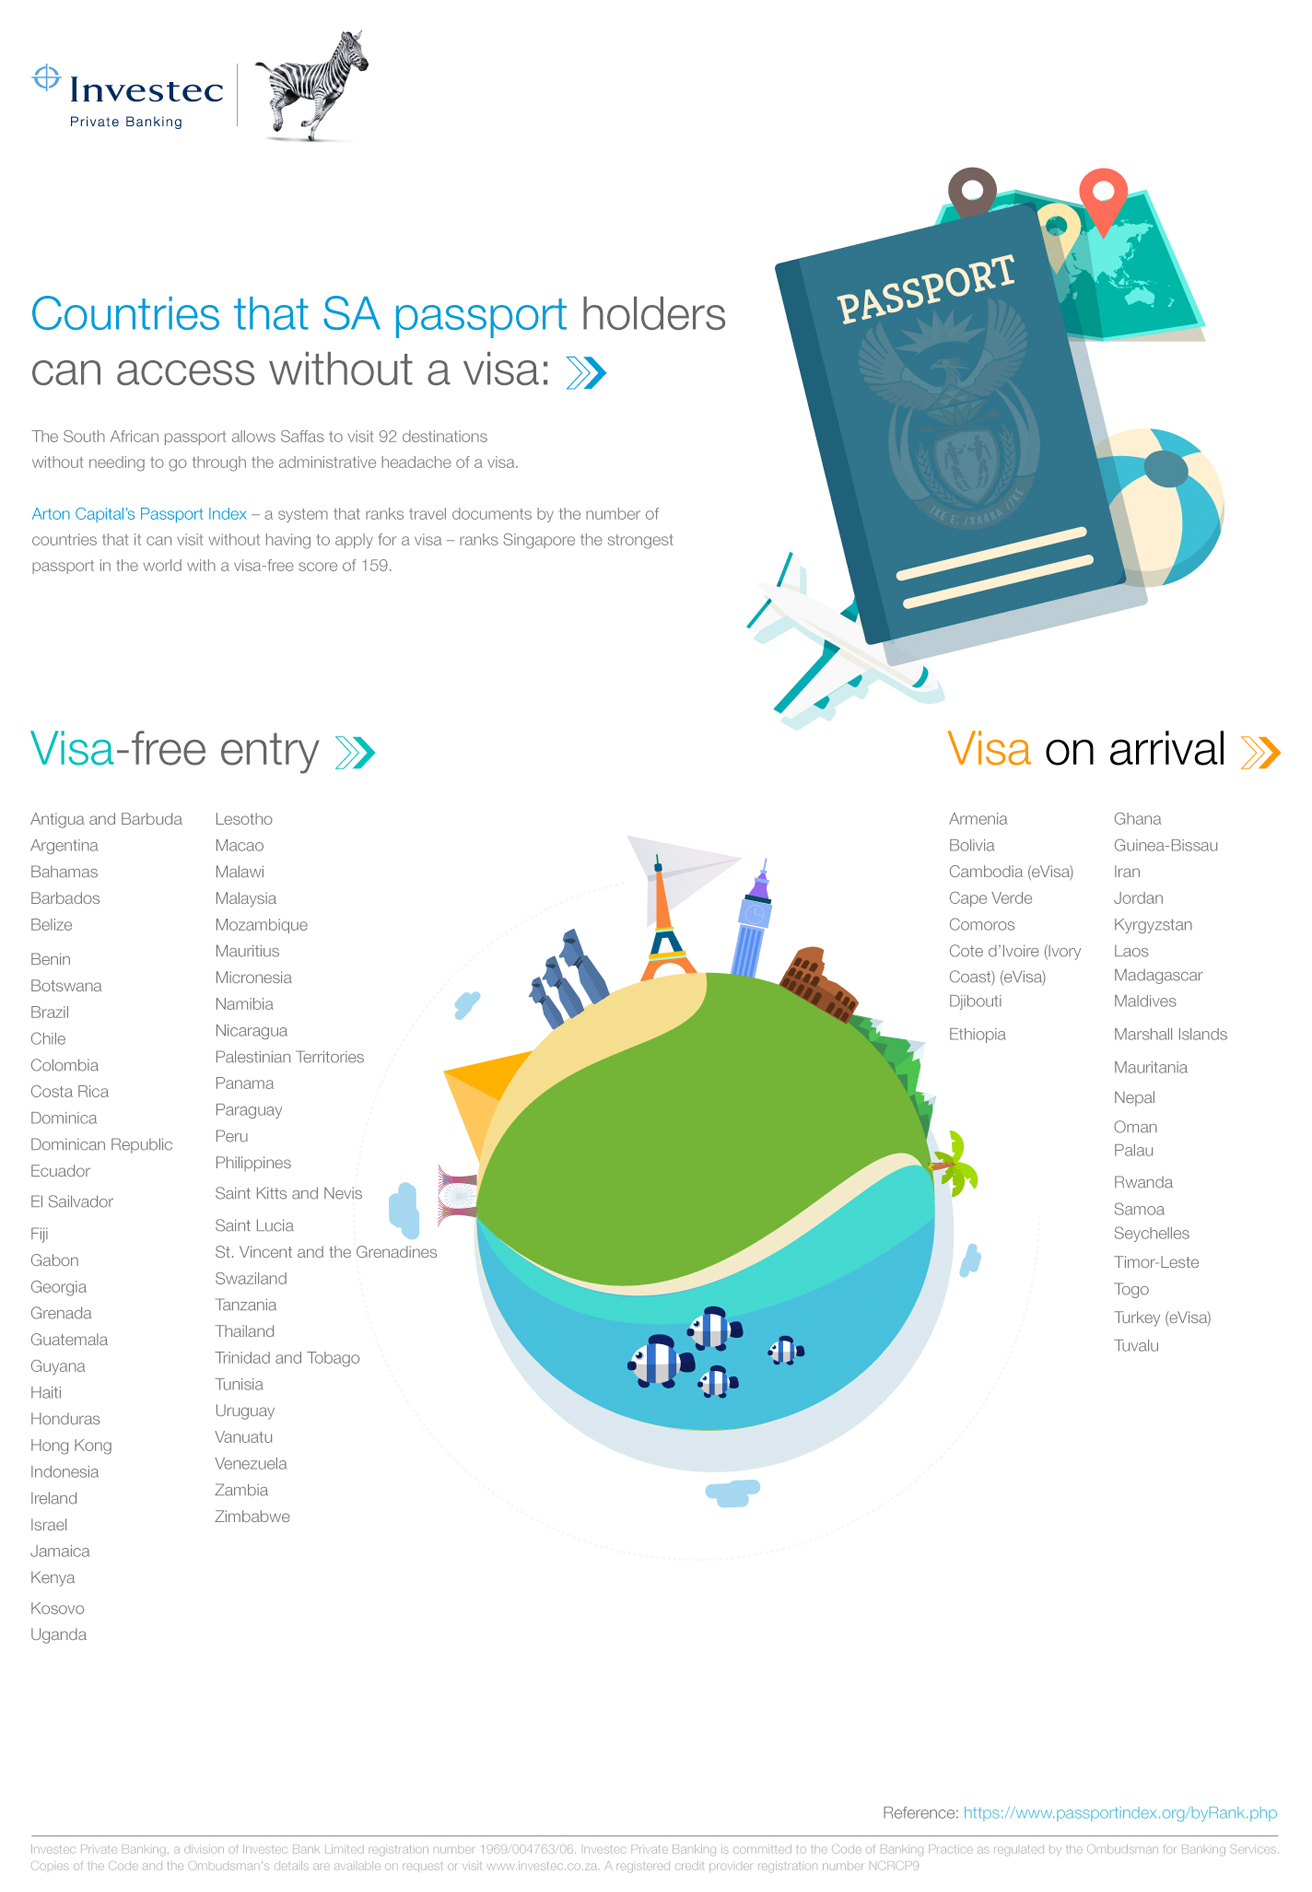 Countries that SA passport holders can access without a visa